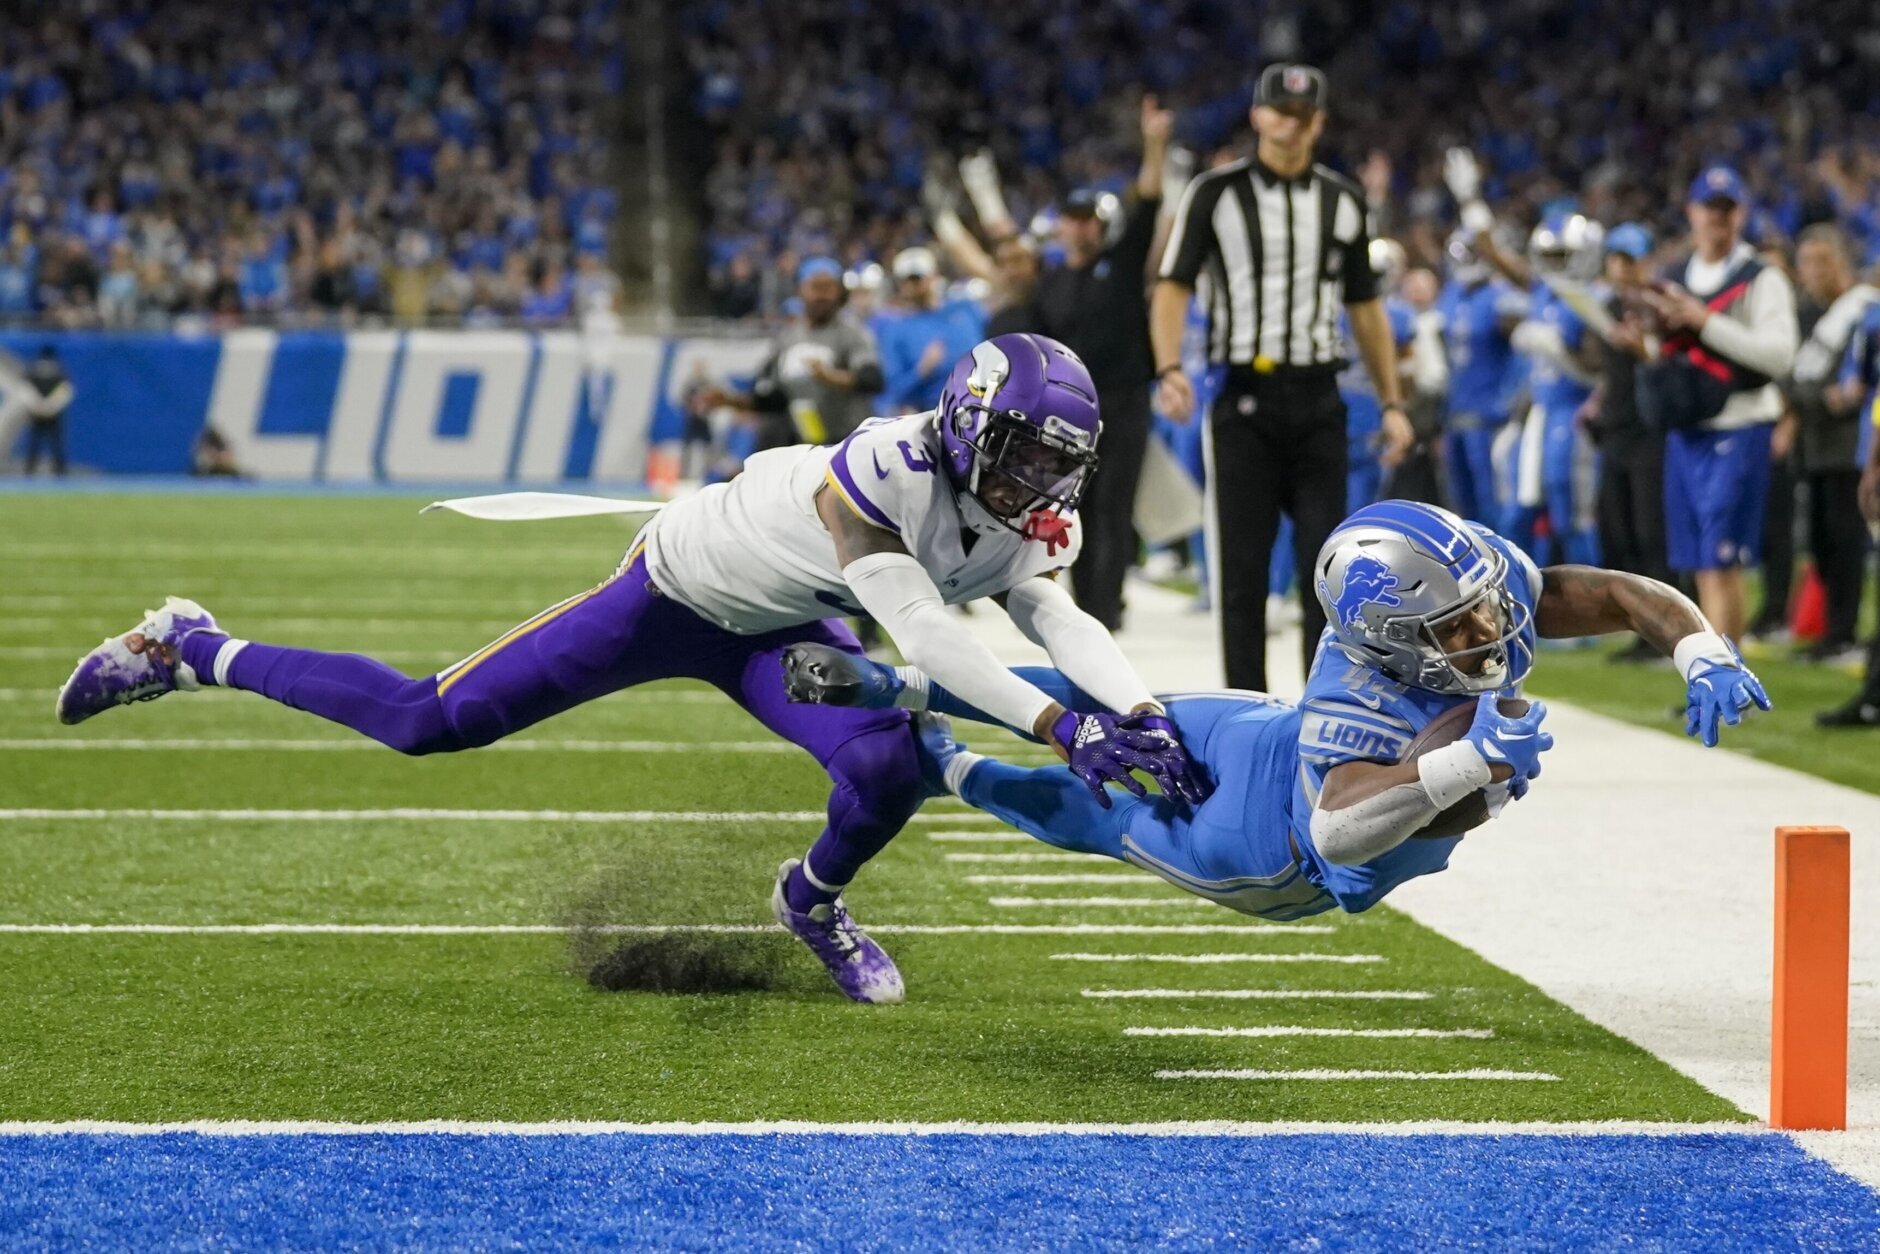 <p><b><i>Vikings 23</i></b><br />
<b><i>Lions 34</i></b></p>
<p>Now you see why <a href="https://profootballtalk.nbcsports.com/2022/12/09/dan-campbell-on-lions-being-favored-over-vikings-im-shocked-by-that/" target="_blank" rel="noopener">Detroit was a surprise favorite</a>.</p>
<p>While <a href="https://twitter.com/christomasson/status/1602141982939389952?s=20&amp;t=ksxaVmQzzn_svnw5J4sS6Q" target="_blank" rel="noopener">Minnesota is making some undesirable history</a>, the Lions have won five of their last six after a 1-6 start to the season. And <a href="https://profootballtalk.nbcsports.com/2022/12/08/dan-campbell-ill-regret-not-going-for-it-on-fourth-down-against-the-vikings-until-i-die/" target="_blank" rel="noopener">a bad Dan Campbell decision</a> probably would have won them the first meeting between these two teams. Don&#8217;t sleep on Detroit down the stretch.</p>
